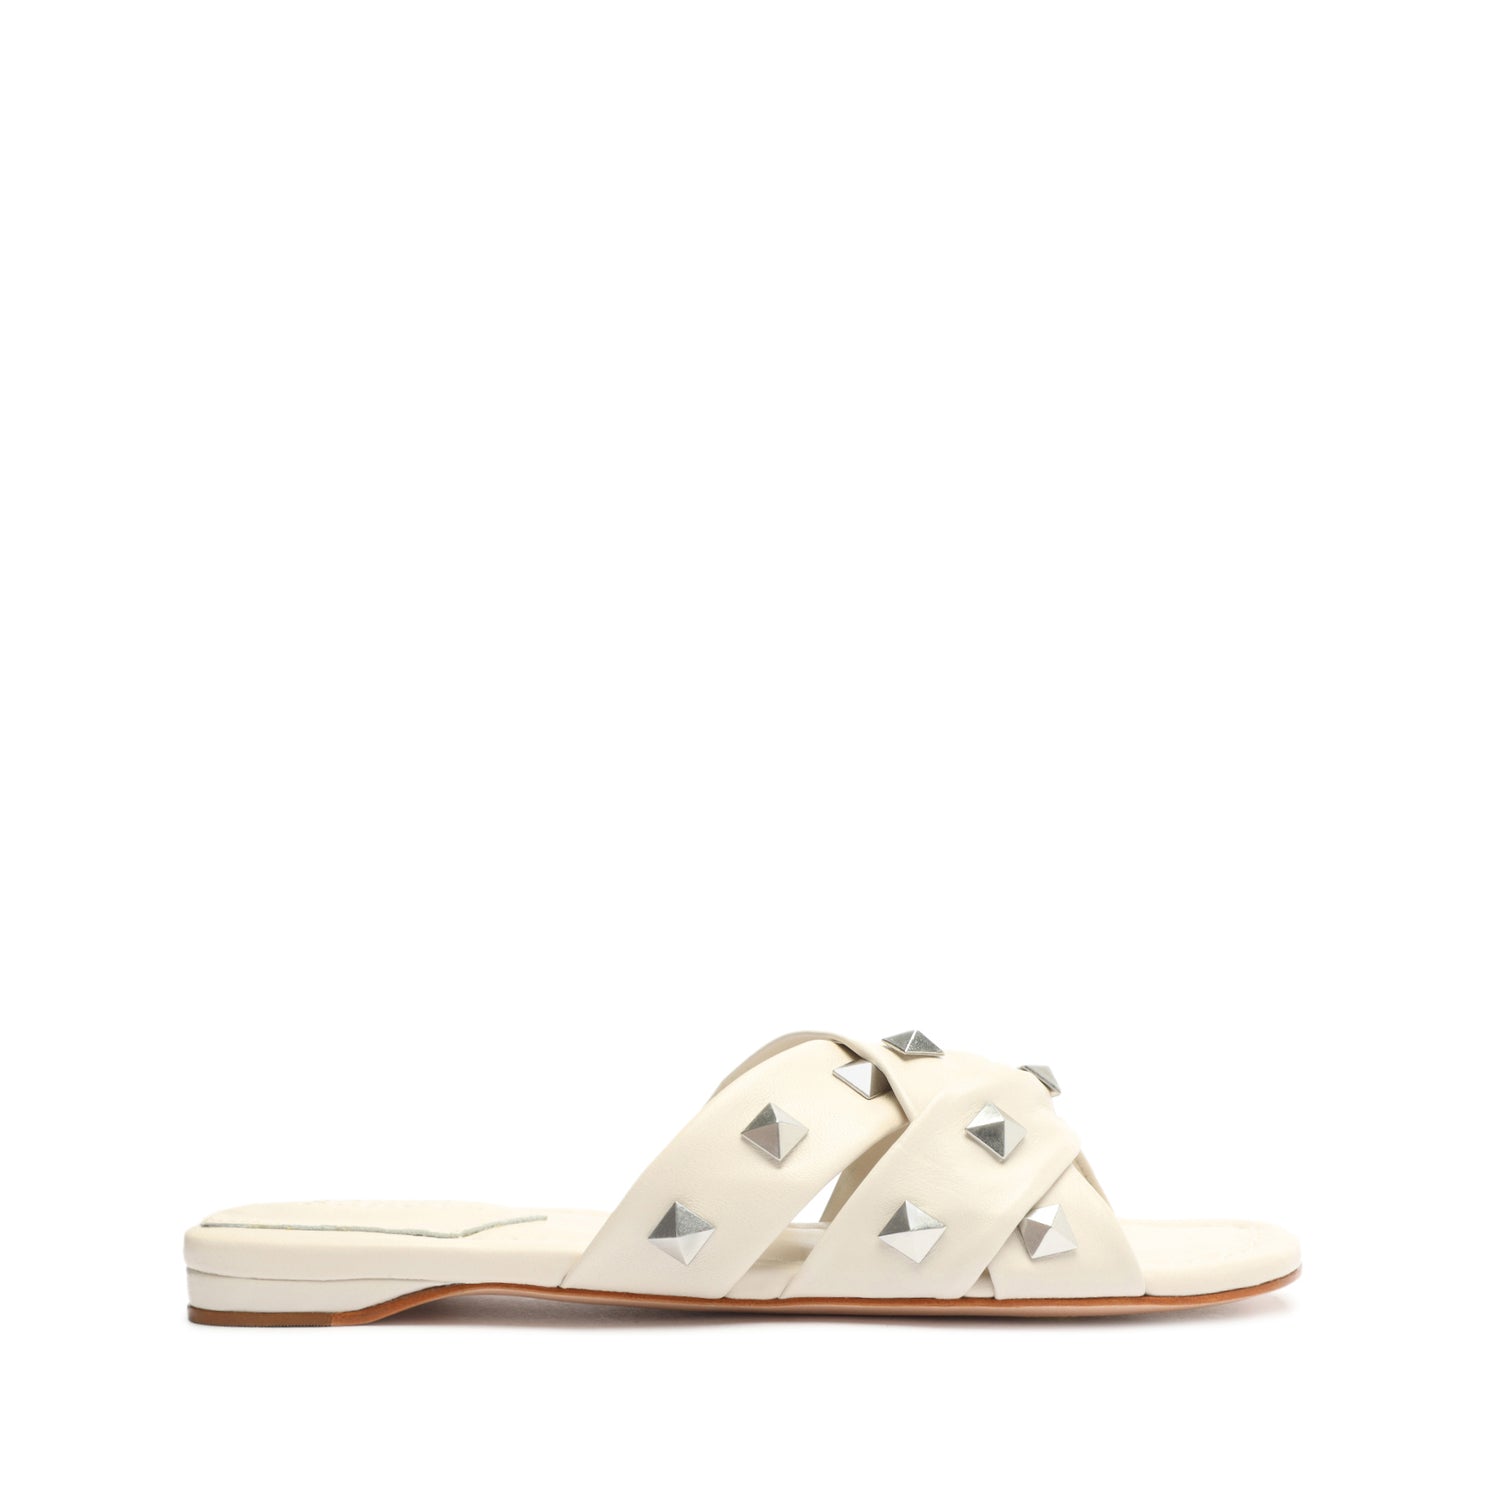 Roxanne Nappa Leather Sandal Flats High Summer 23 5 Pearl Nappa Leather - Schutz Shoes